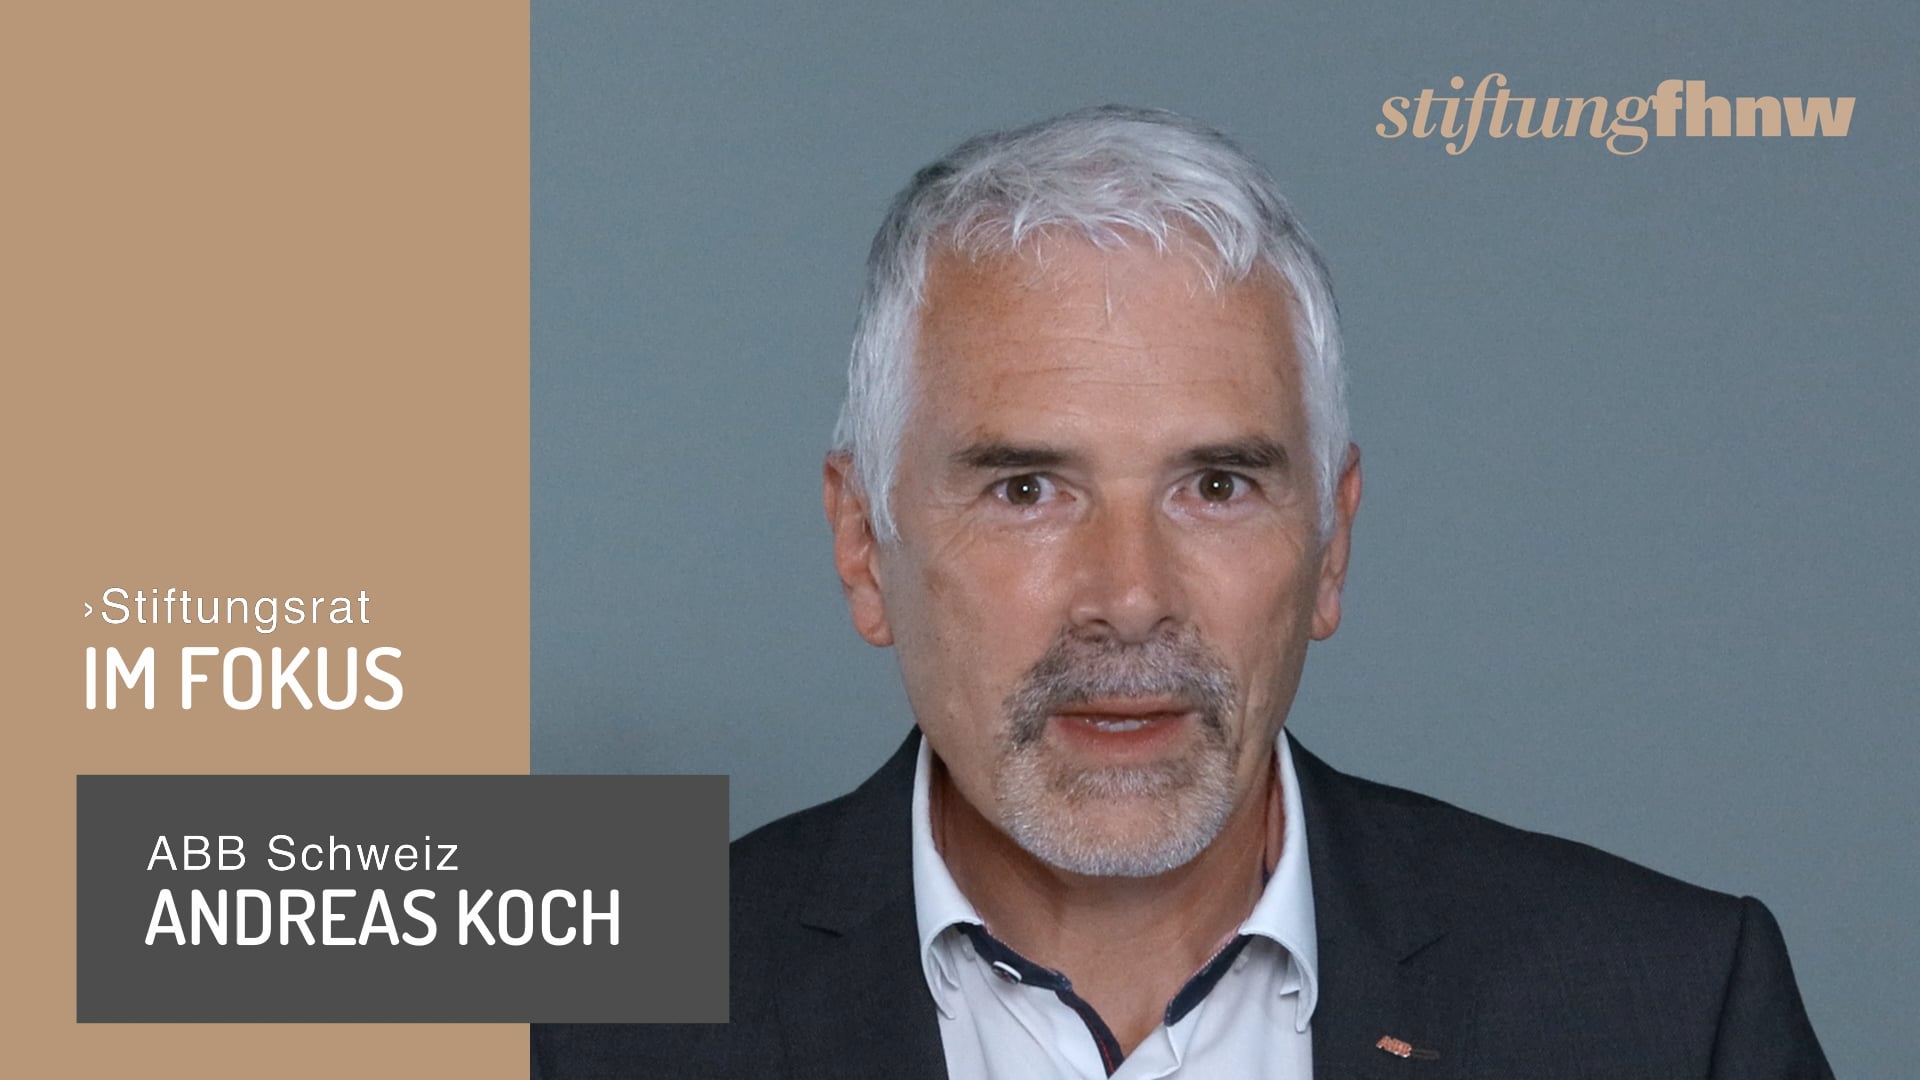 Stiftungsrat Andreas Koch – Stiftung FHNW